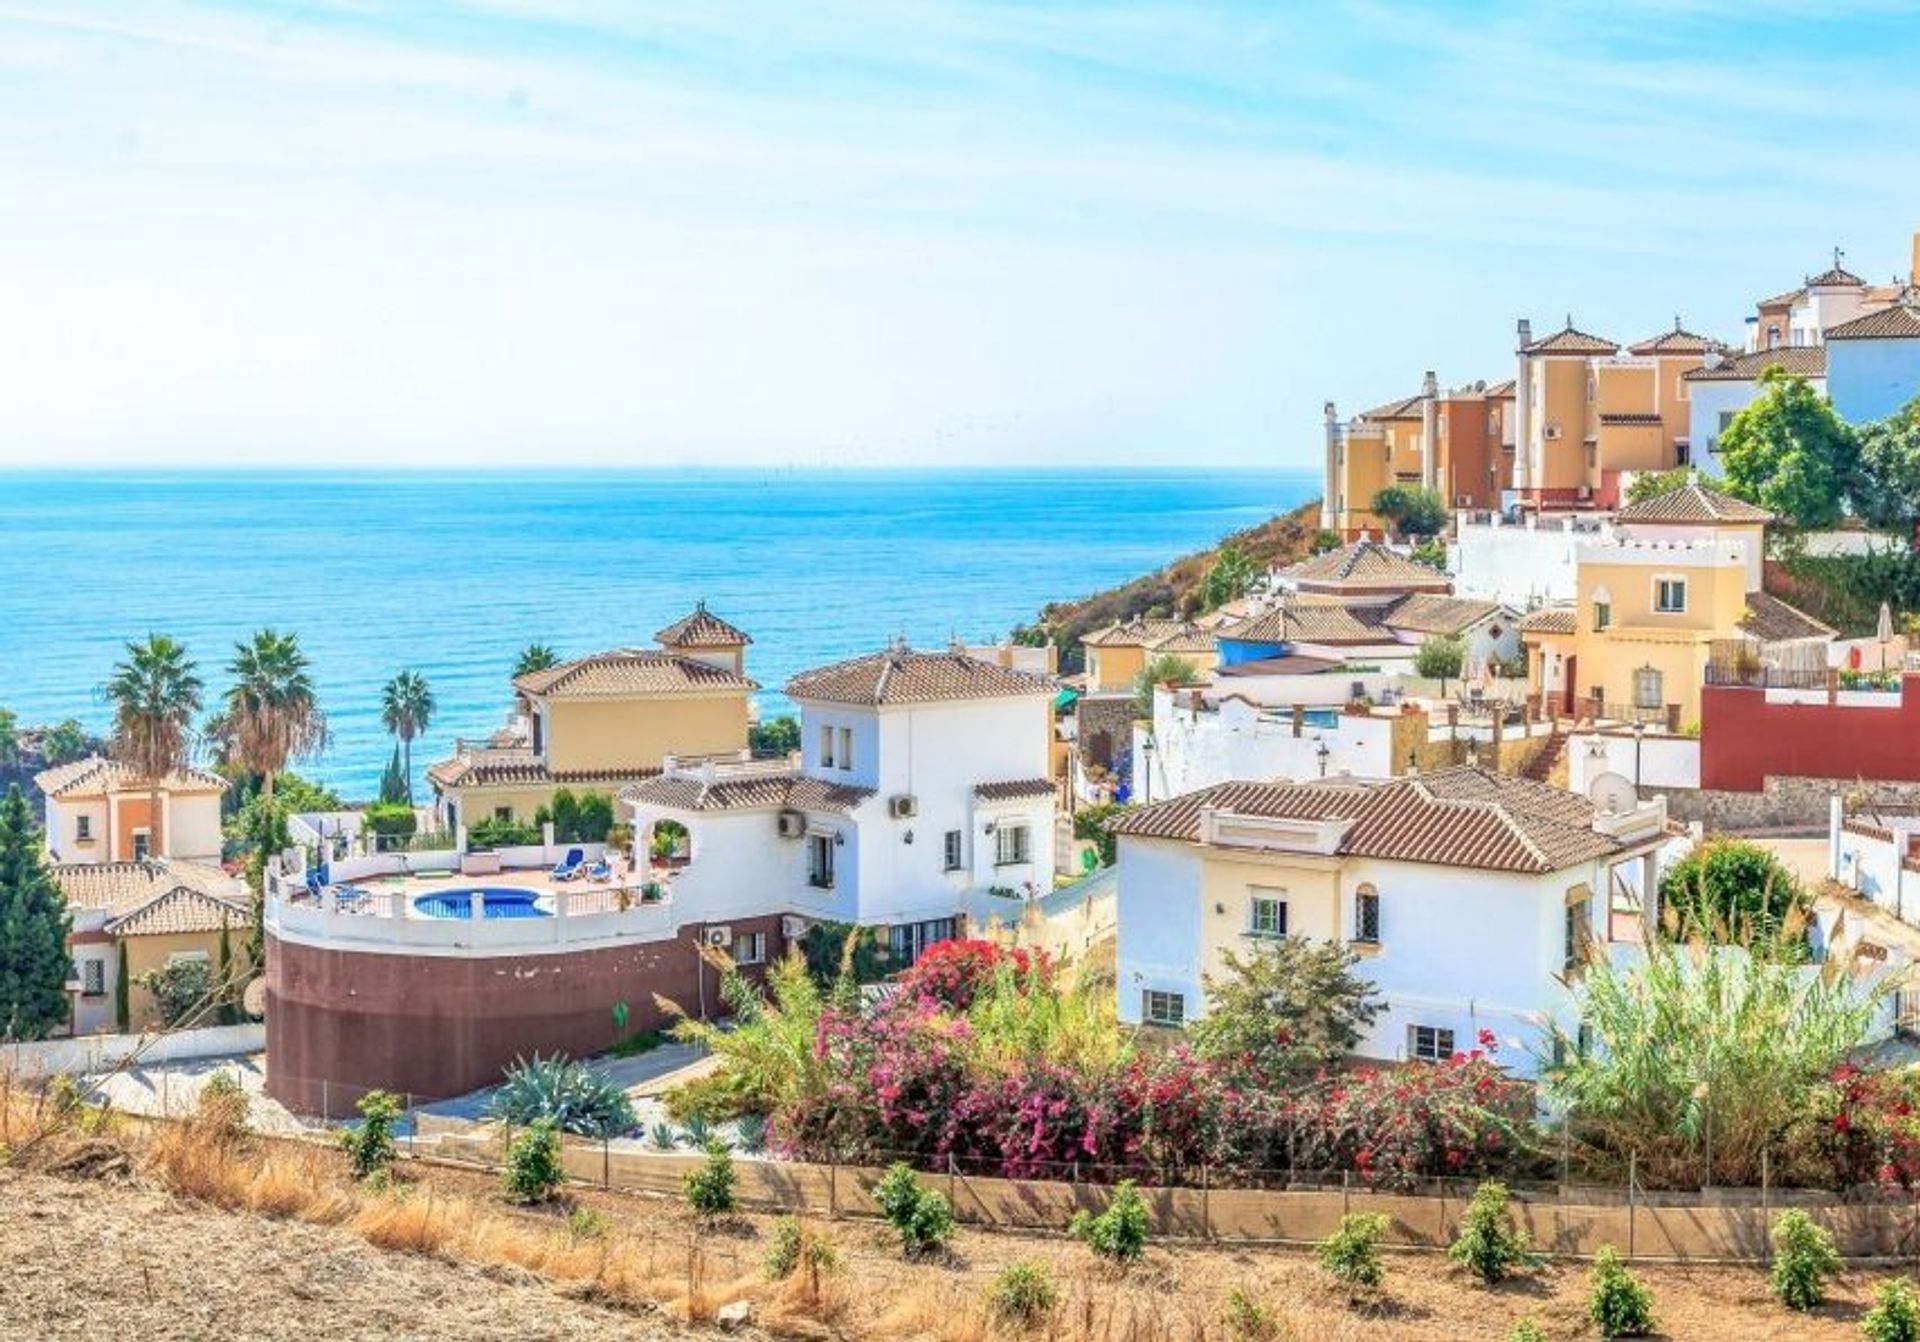 Discover the charms of one of the most quaint regions in the Costa del Sol